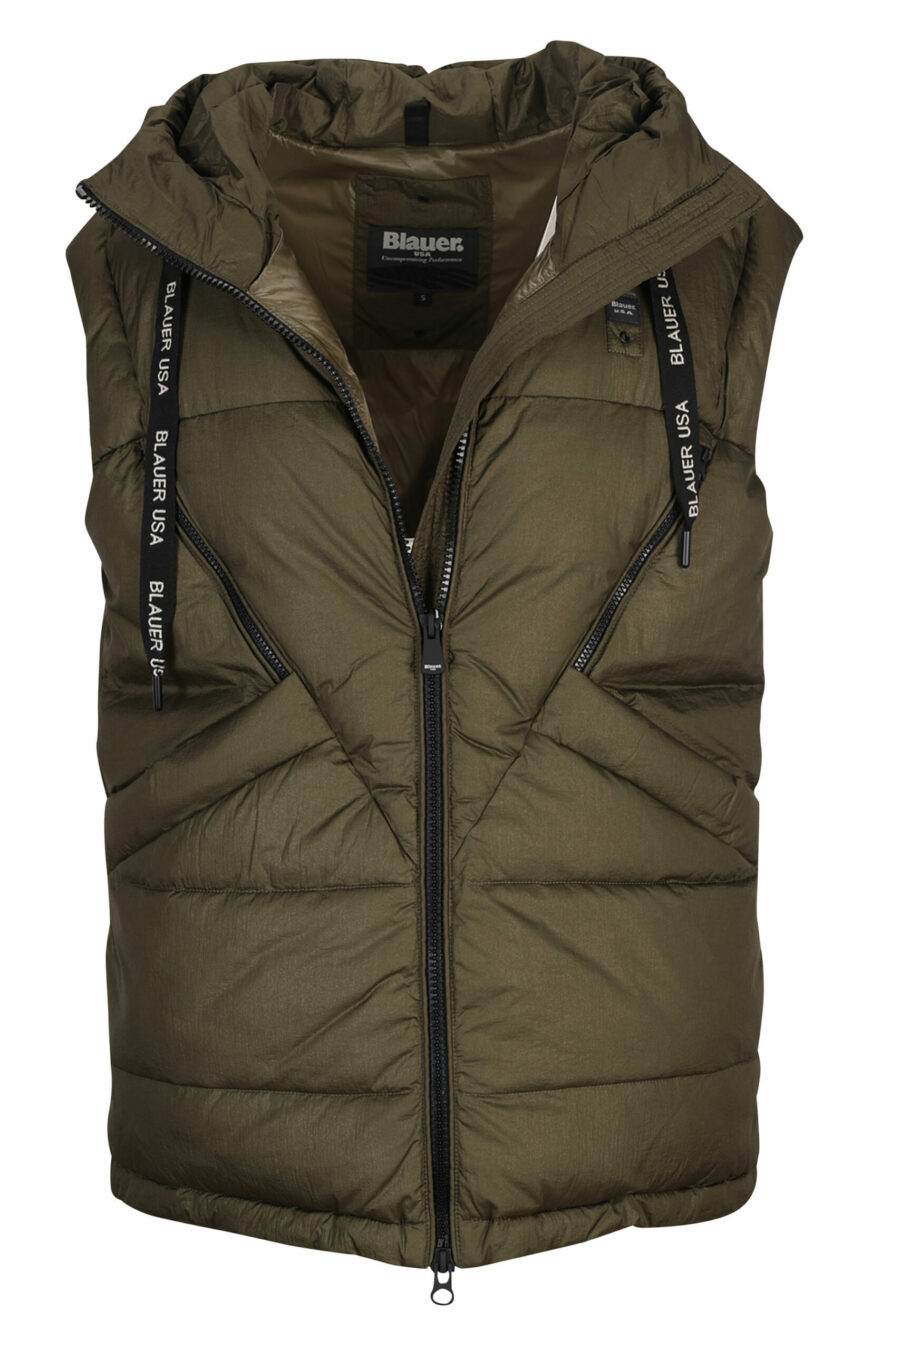 Dark green hooded waistcoat with diagonal lines - 8058610610968 3 scaled